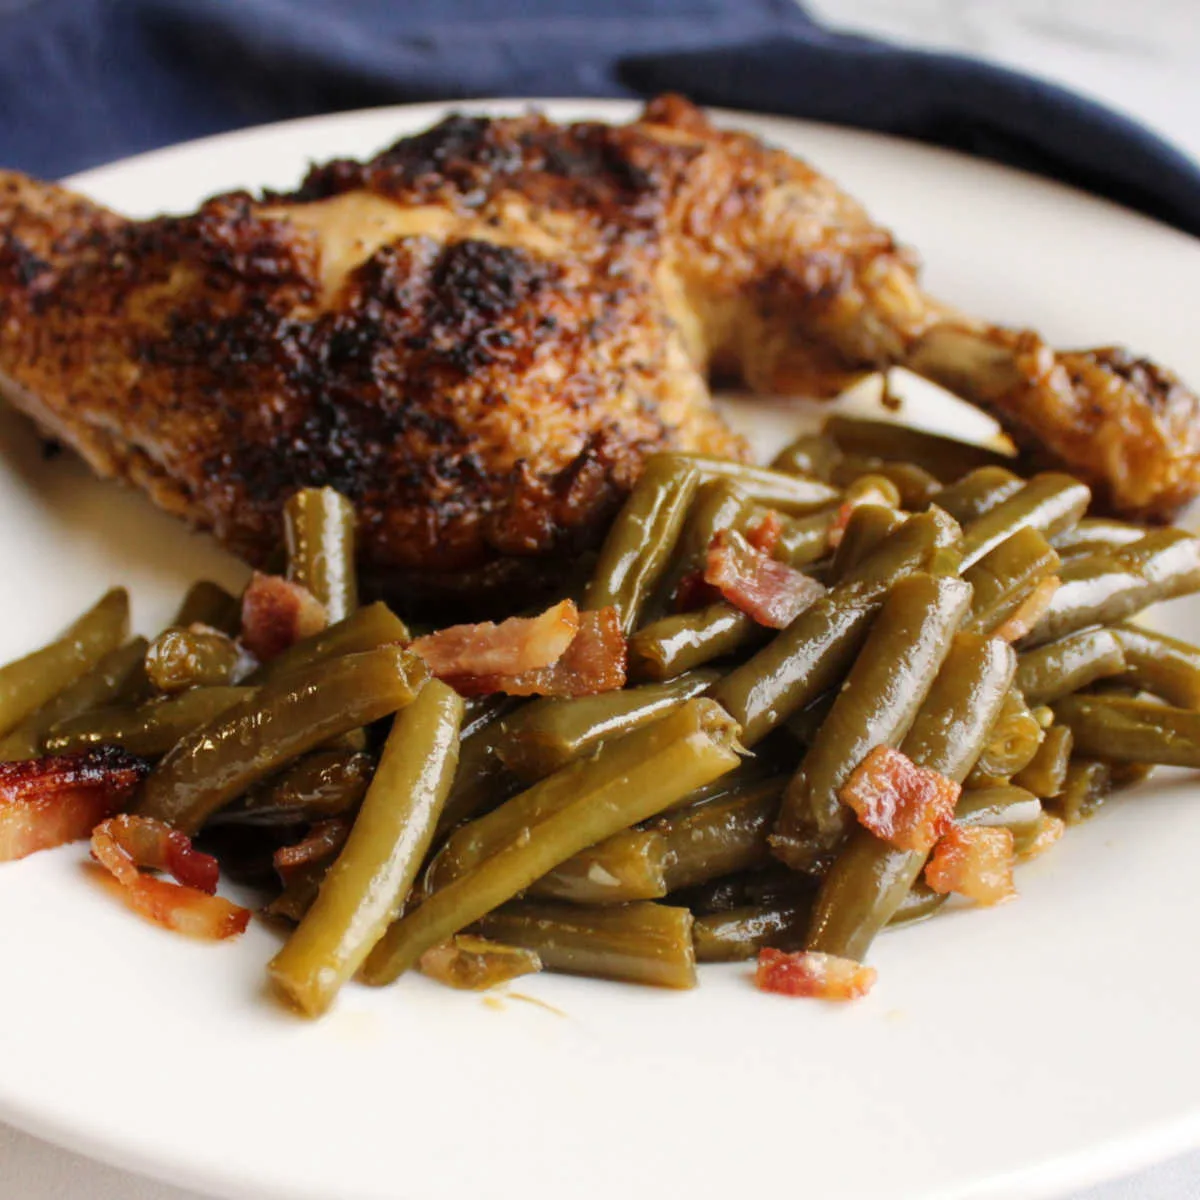 Smothered green beans with bacon and sweet and sour sauce served with grilled chicken on a plate.